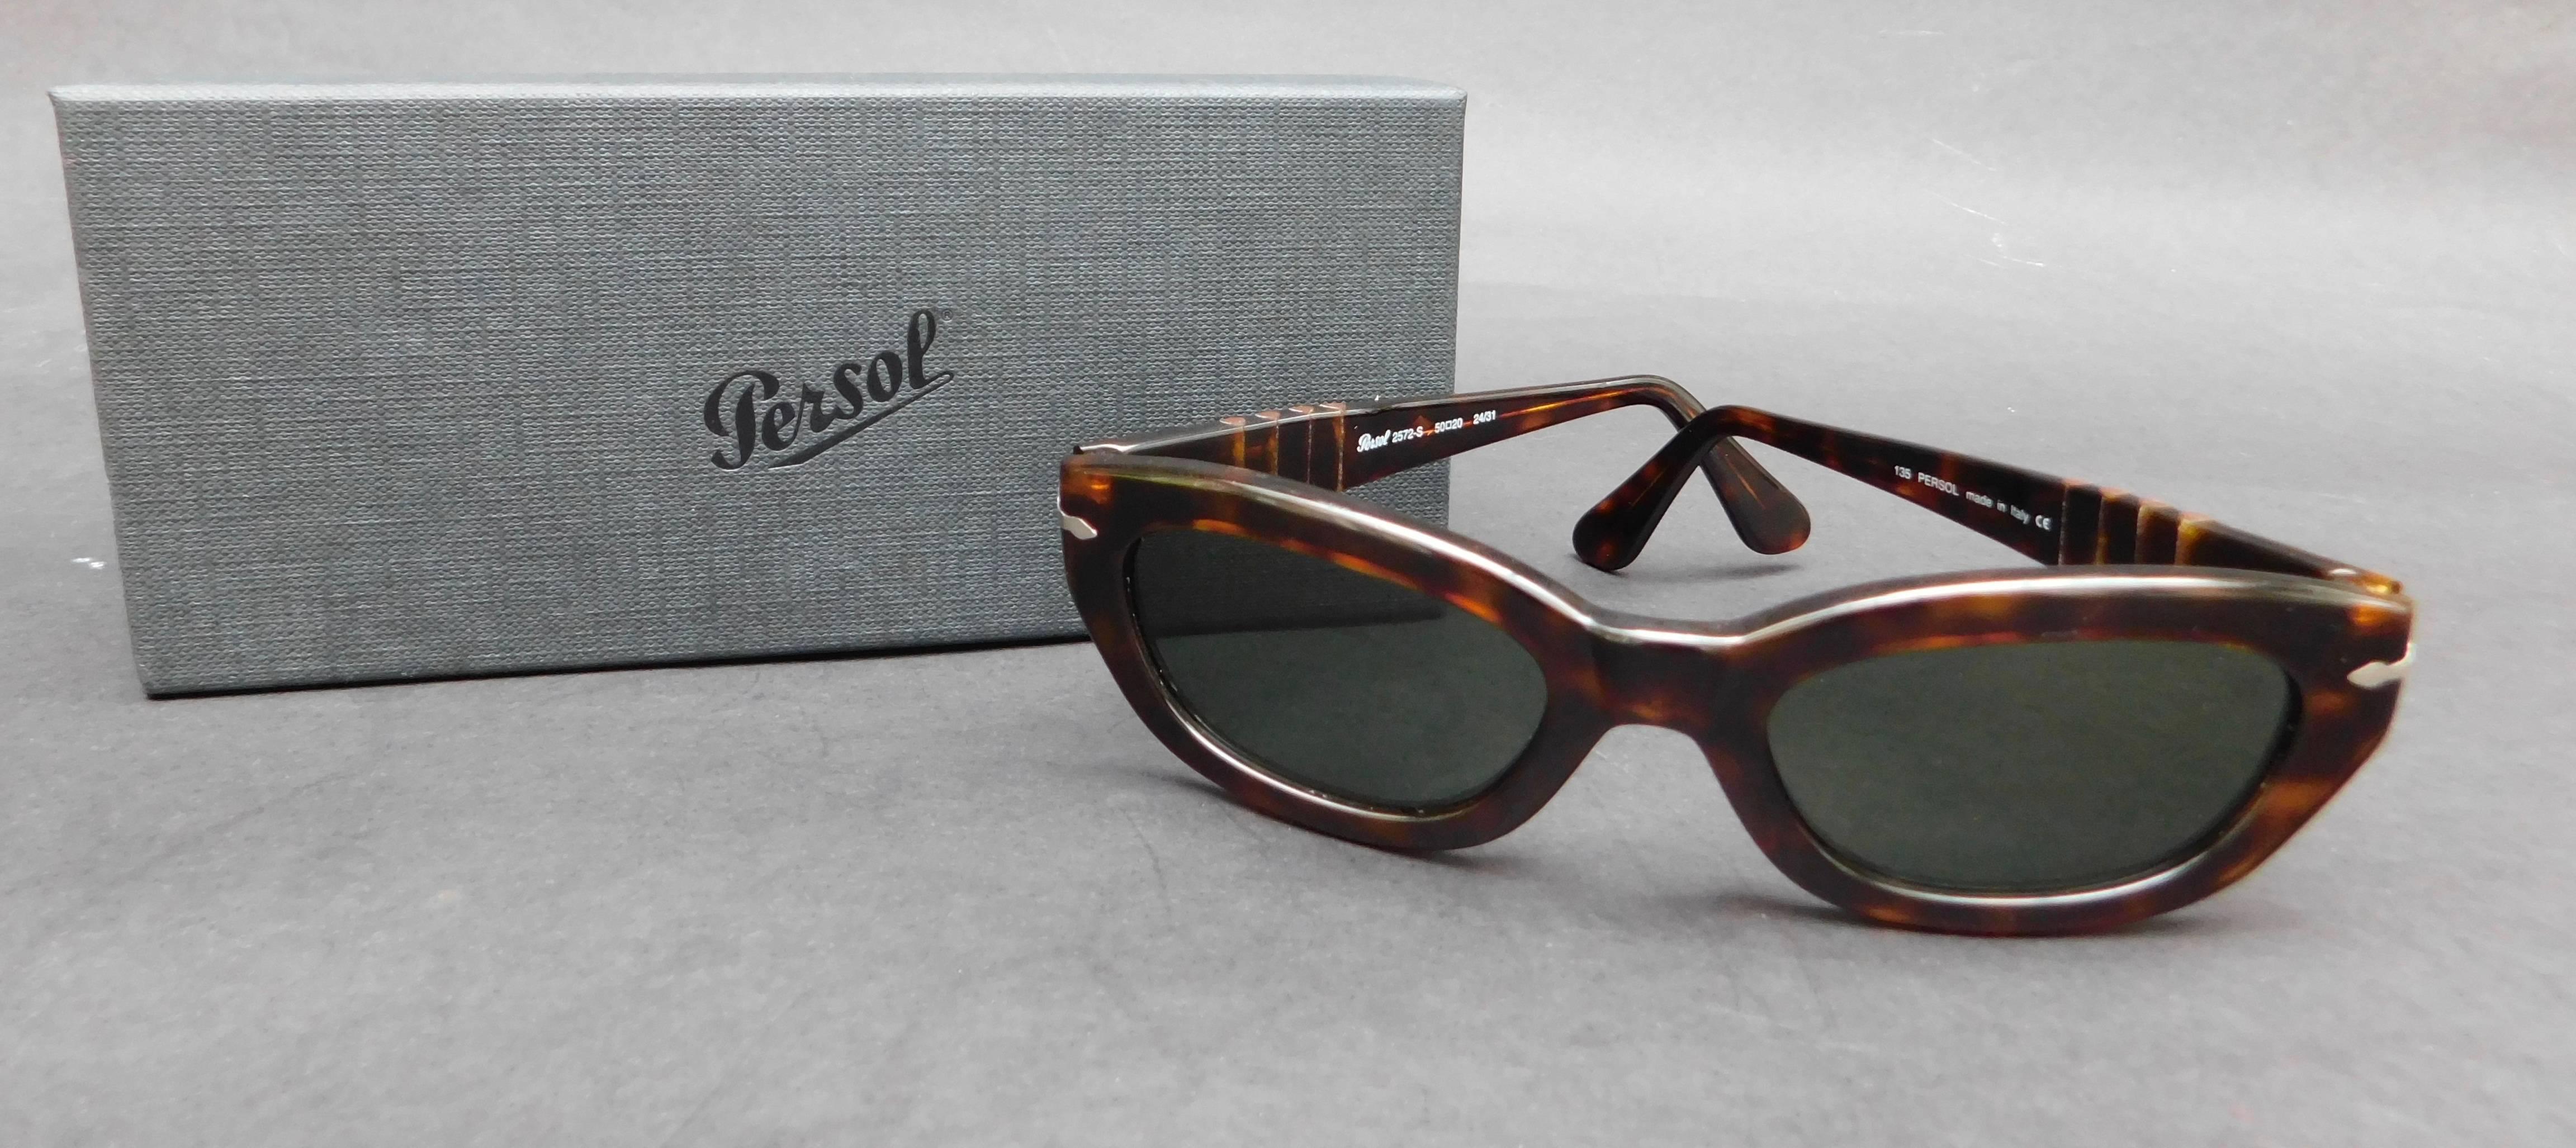 Brown tortoise style Persol sunglasses with dark green lenses from the 1990's.
Model 2572-s 
50-20
24/31
14 cm wide (5.50